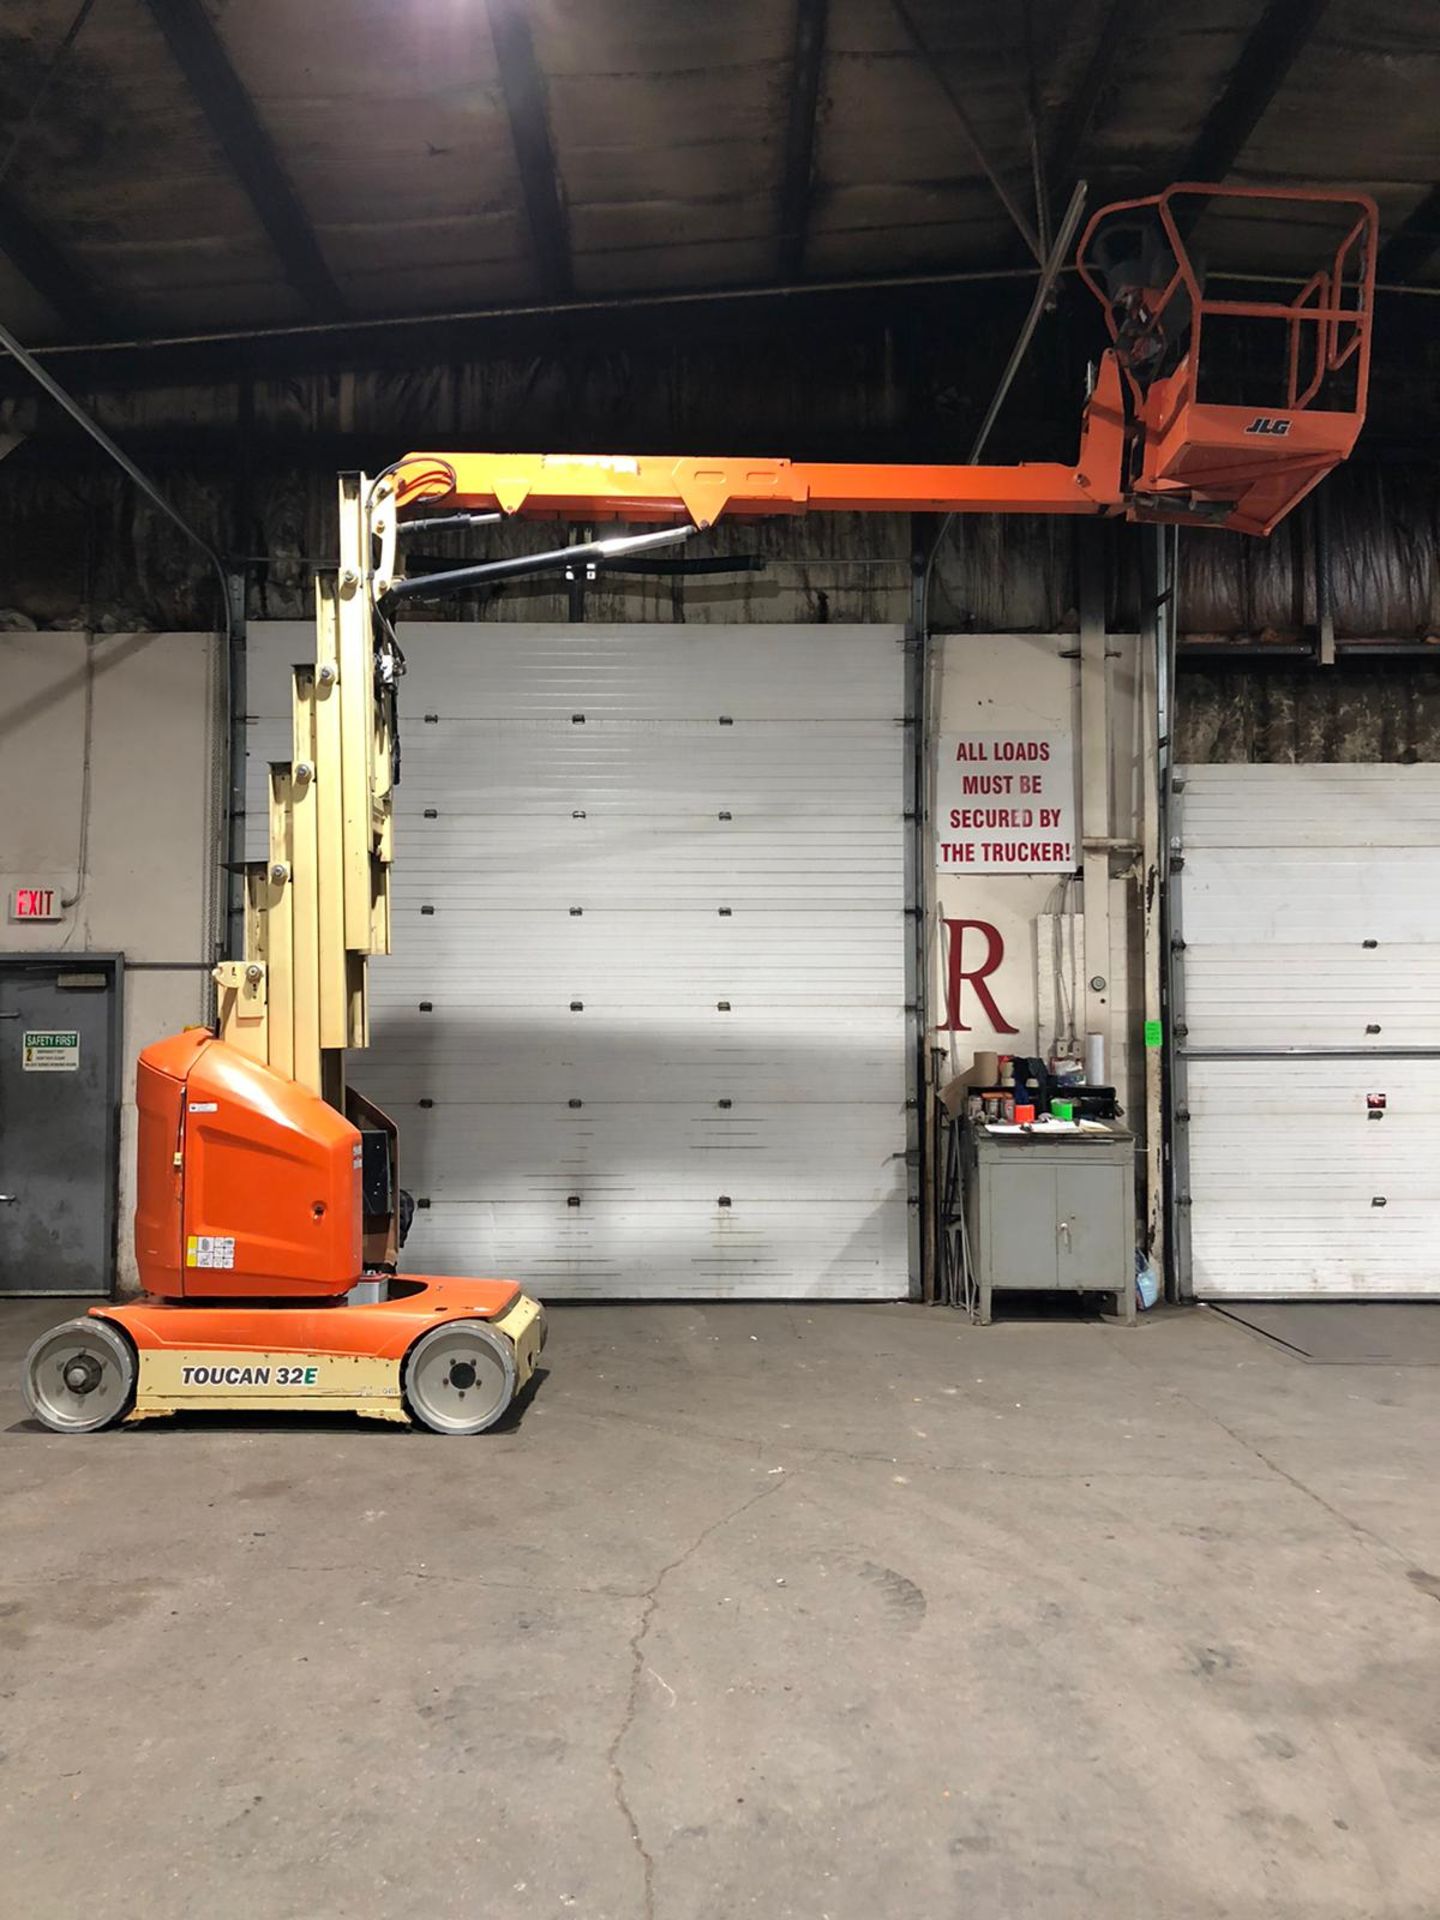 2014 JLG 32E Toucan Mast Boom Lift - Electric 48V with Low Hours with 32' Platform Height and 500lbs - Image 7 of 7